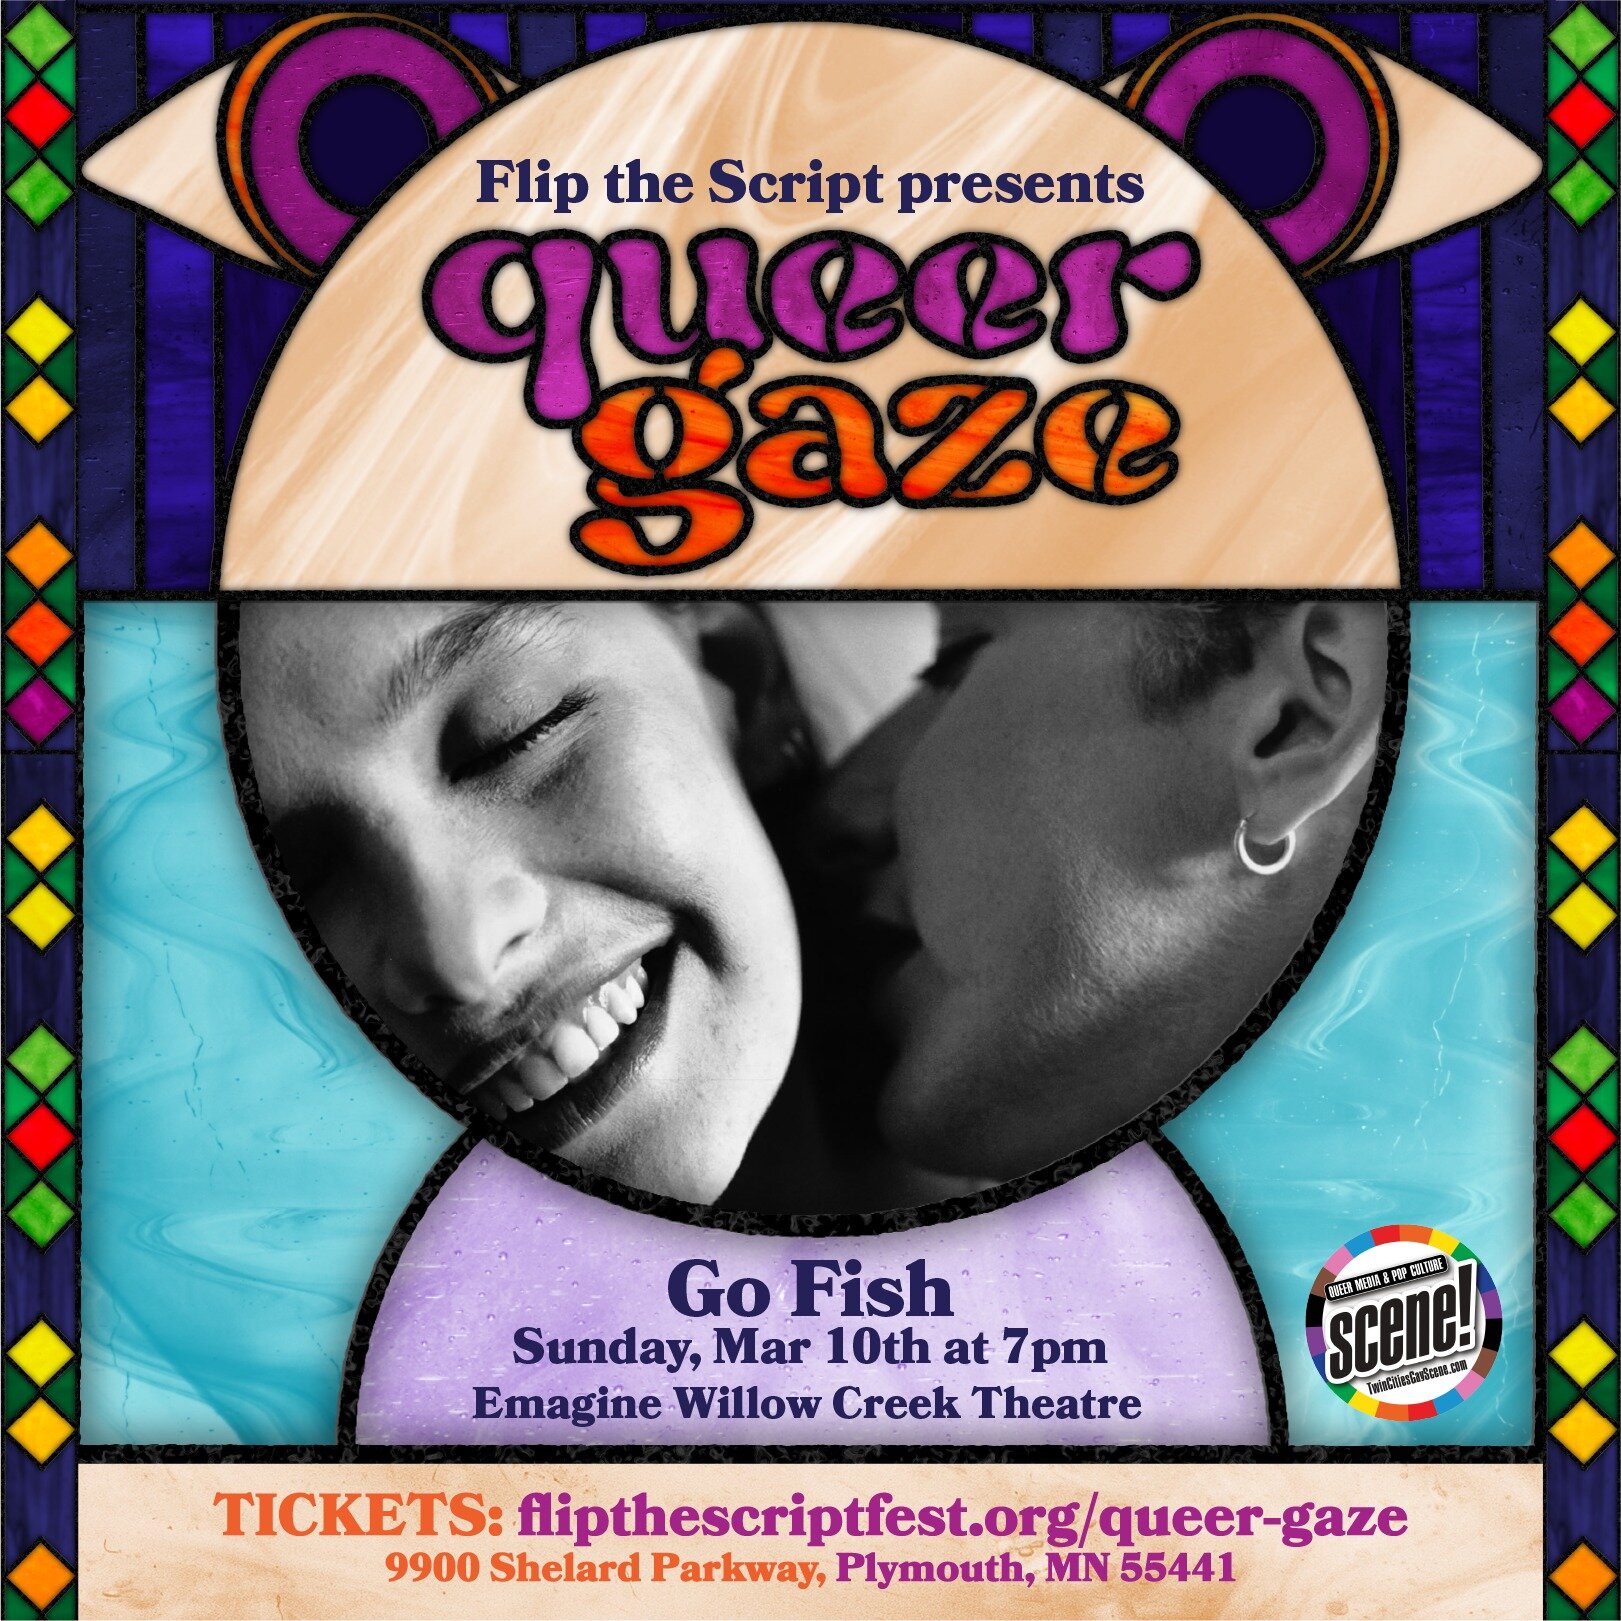 Spring ahead at Queer Gaze with GO FISH, playing Sunday Mar 10th at 7pm at @emaginemn Willow Creek Theater. Bio link for tix!

Join us for Rose Troche and Guinevere Turner&rsquo;s groundbreaking 1994 avant garde romantic tale about finding a soulmate